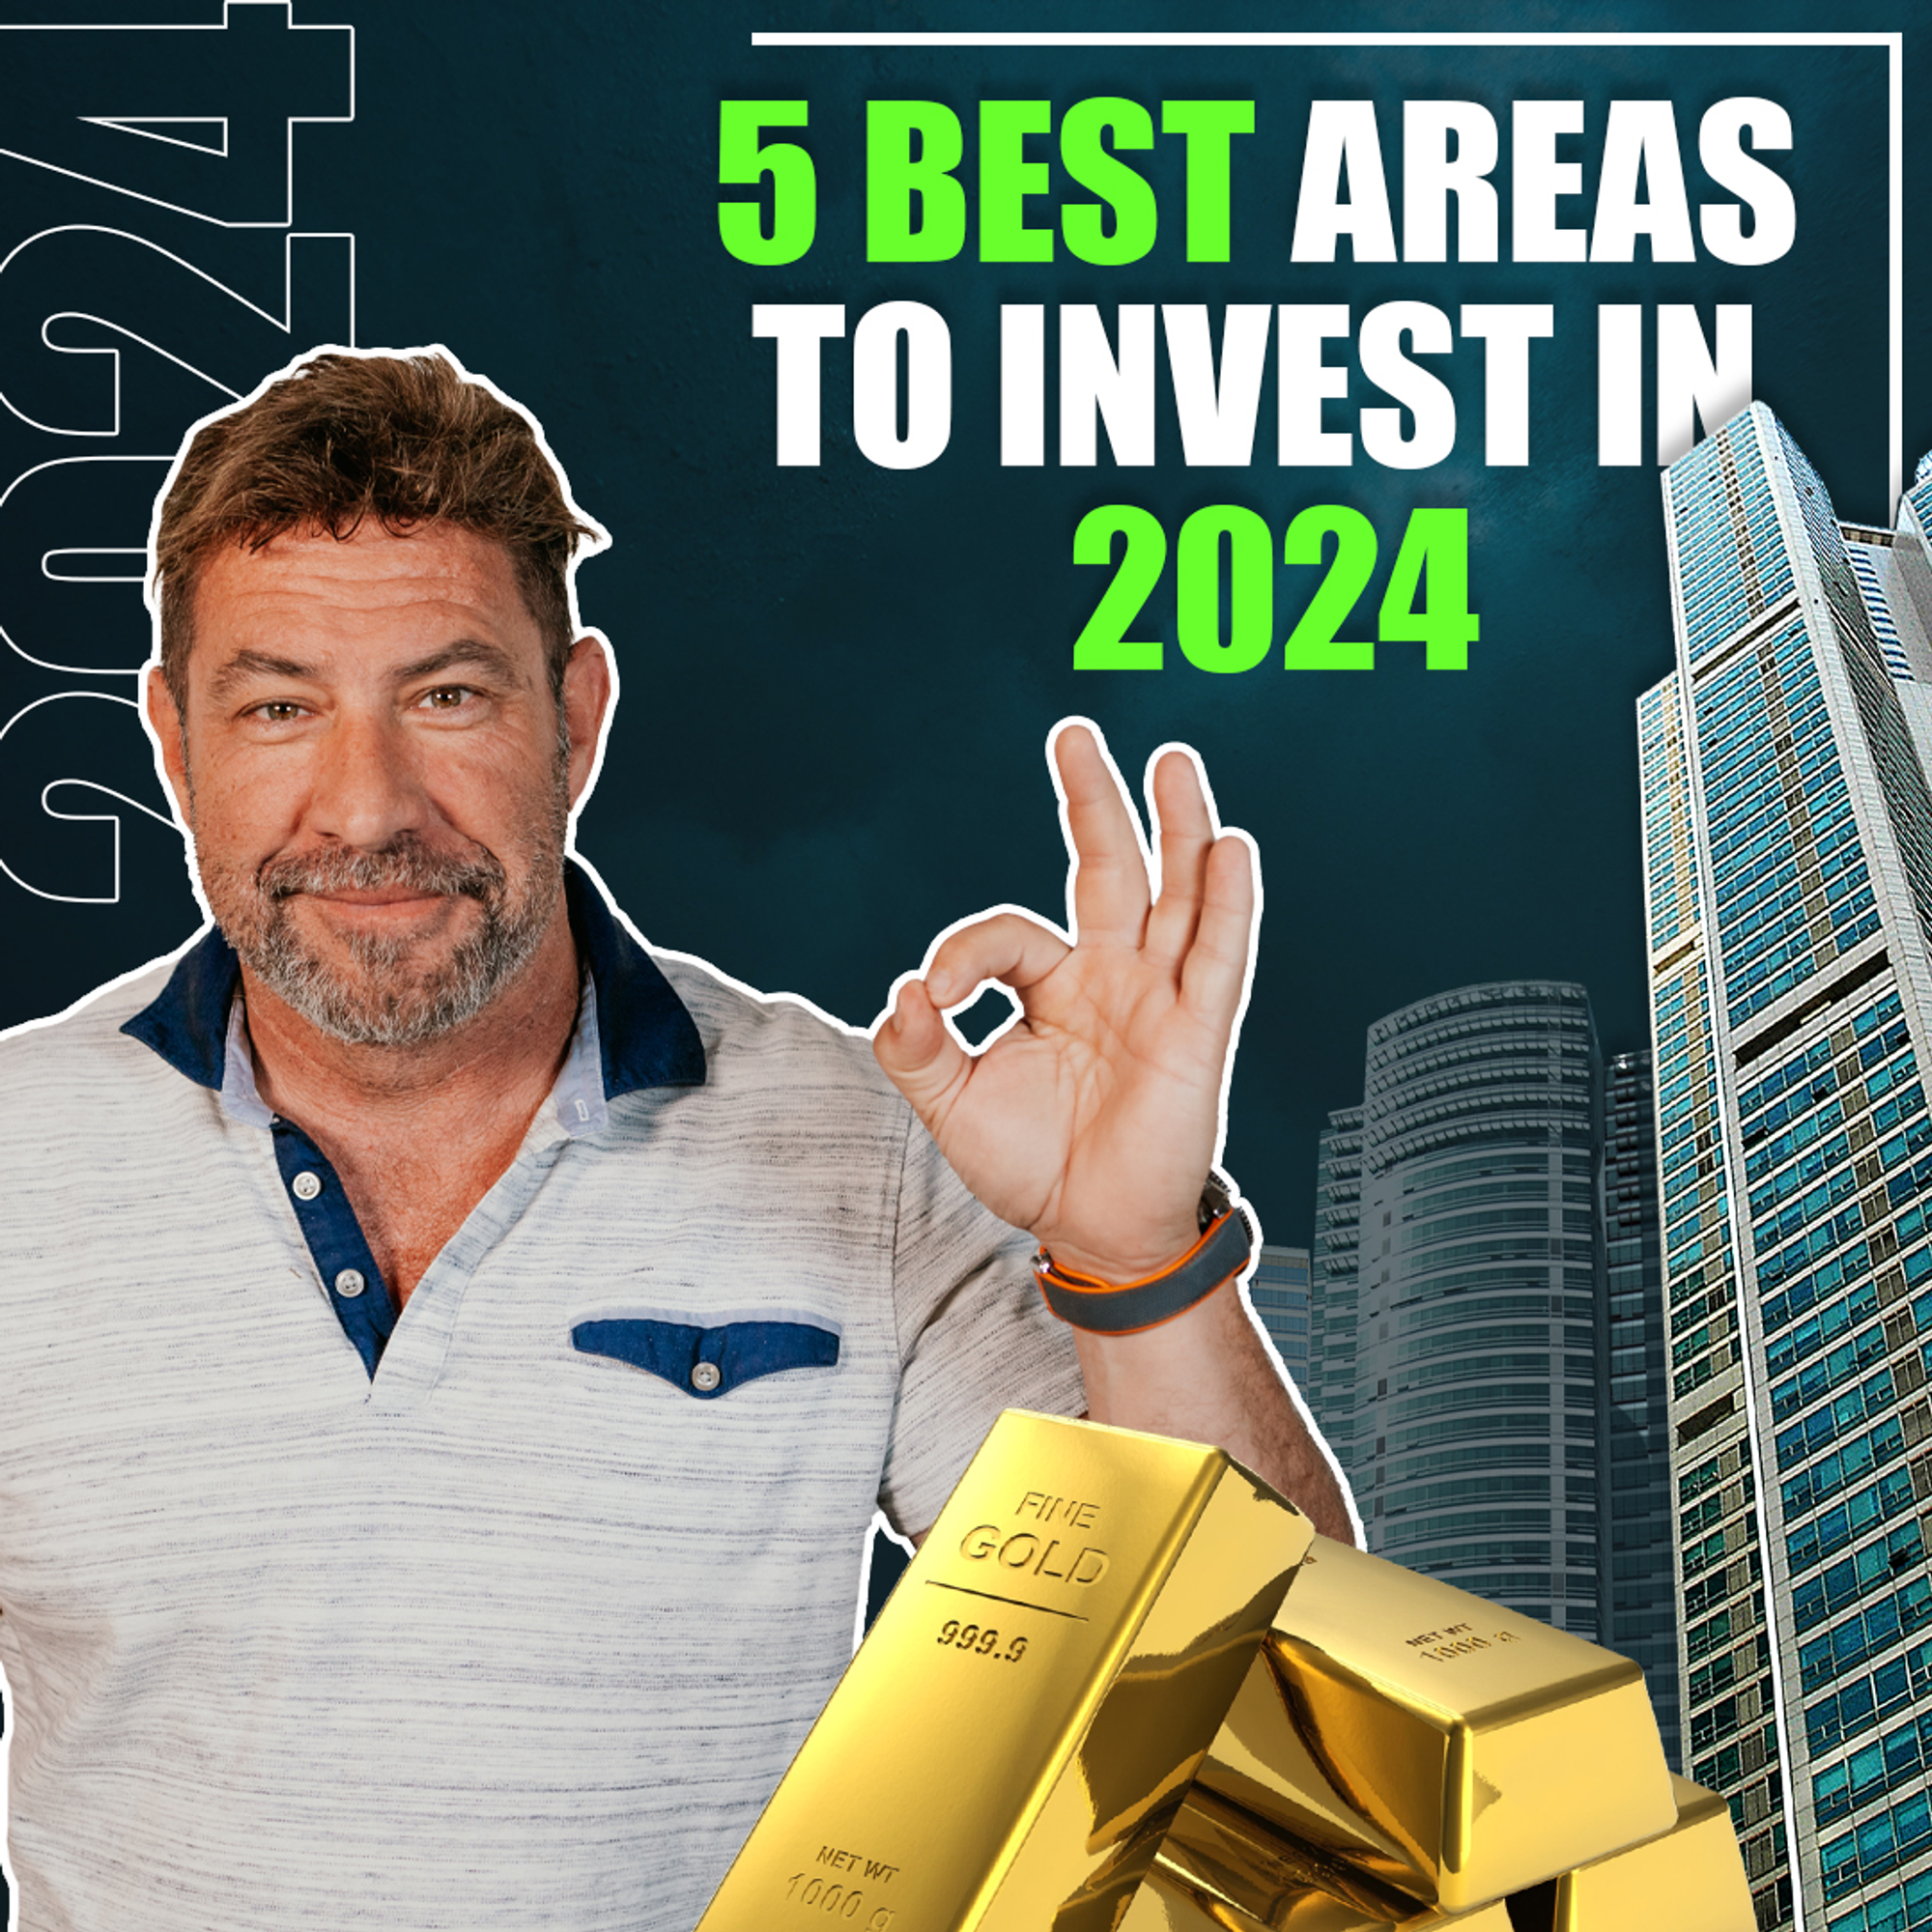 Exploring the 5 Best Areas to Buy Real Estate in 2024